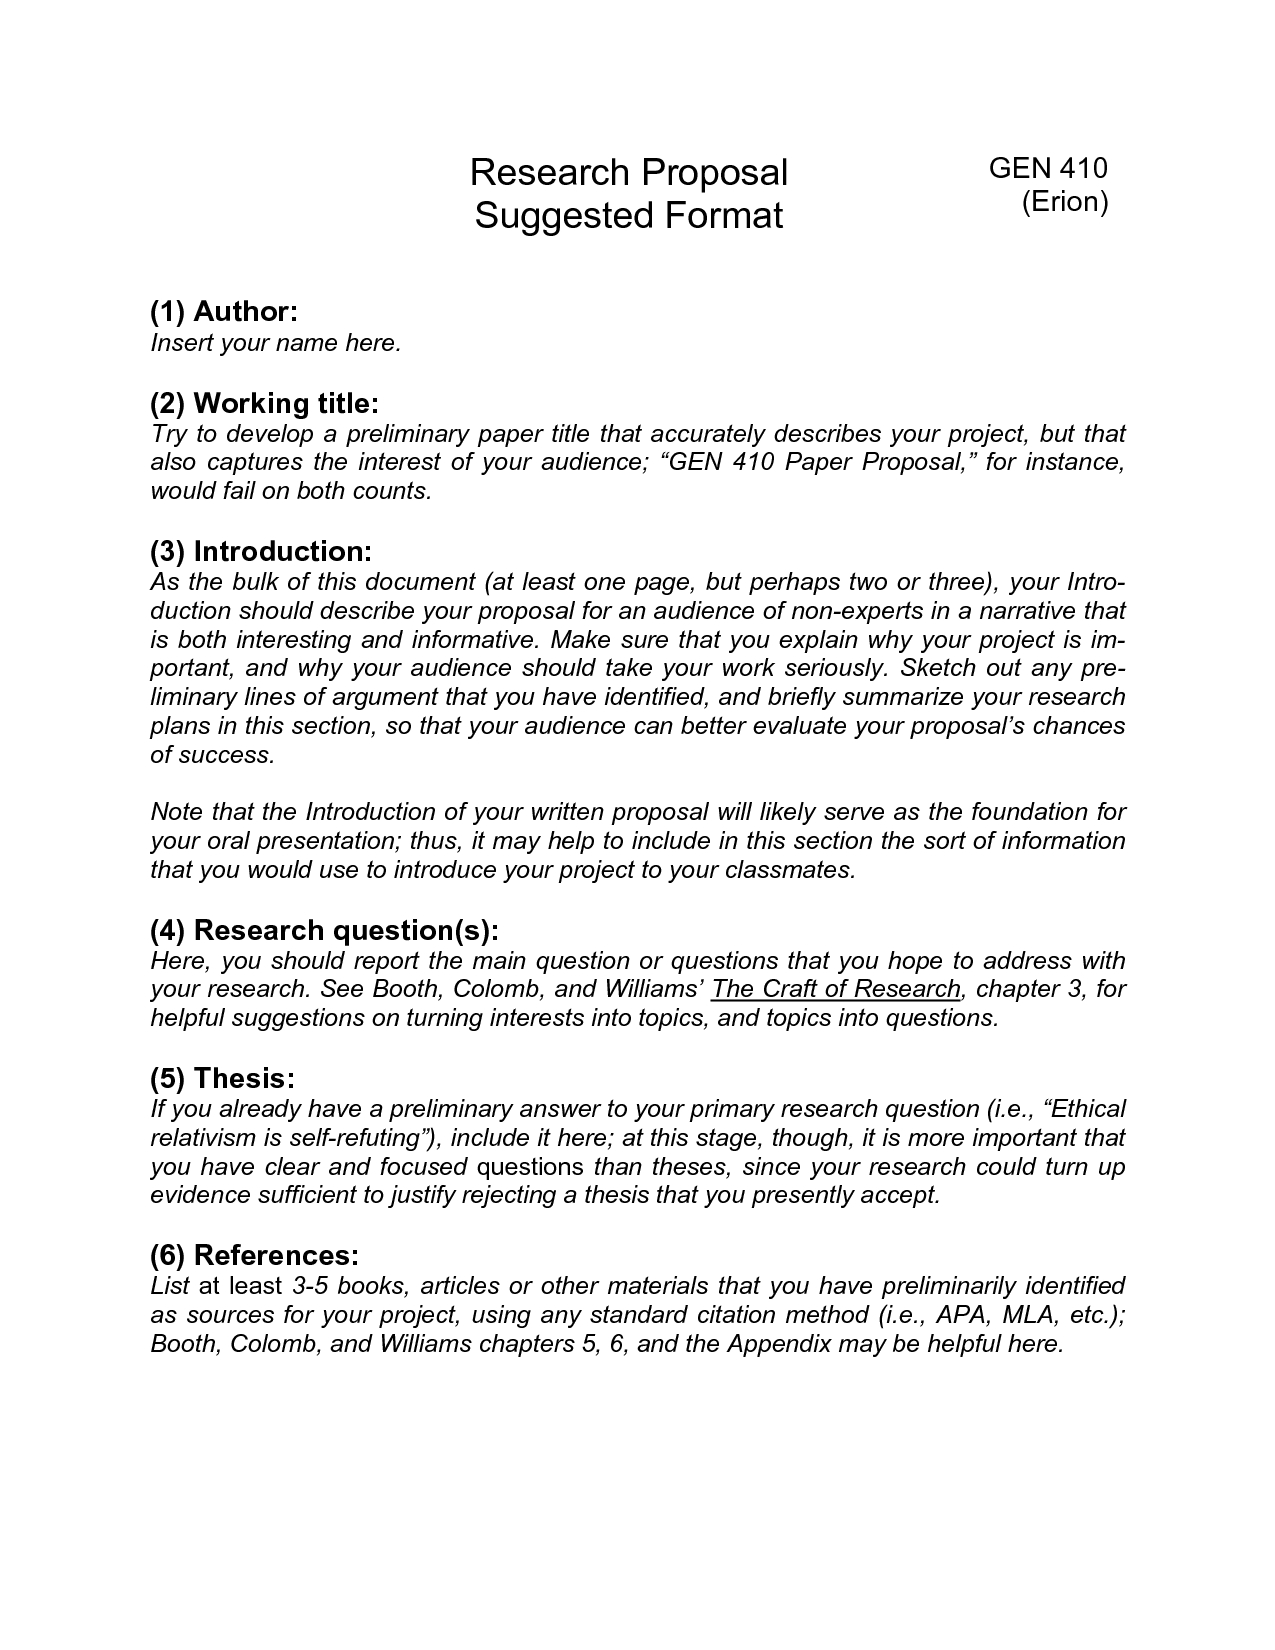 Research Paper Best Photos Of Apa Proposal Example Style In Research Report Sample Template